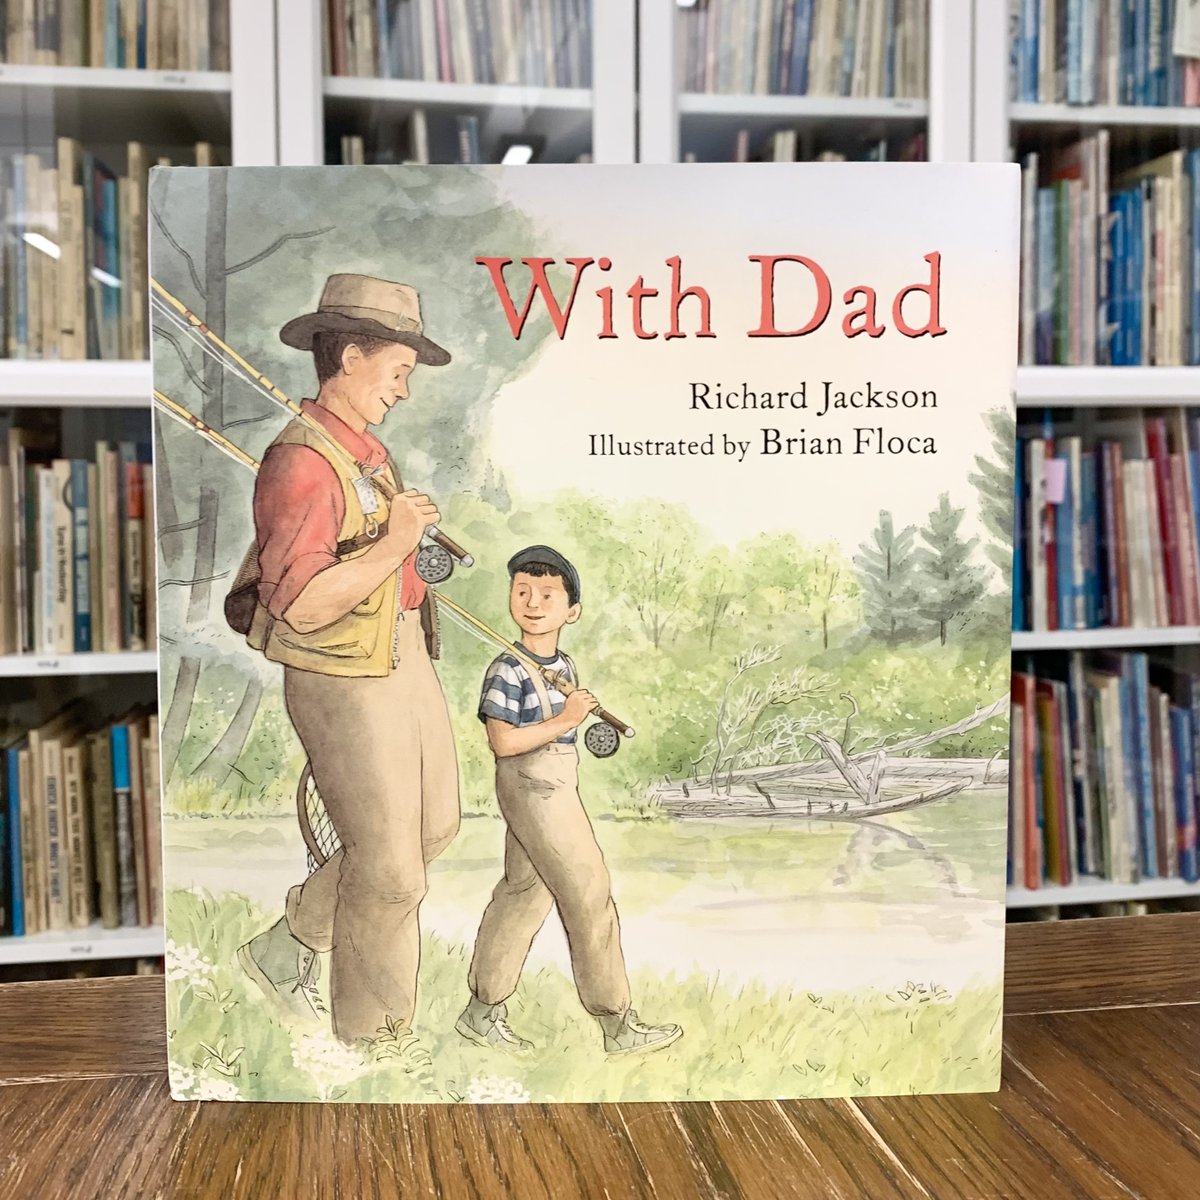 Happy book birthday to WITH DAD! This warm #picturebook about a boy with a father in the military reflecting on cherished memories of a camping trip with Dad is on shelves today! @BrianFloca ow.ly/VWba50Rxybg #bookbirthday